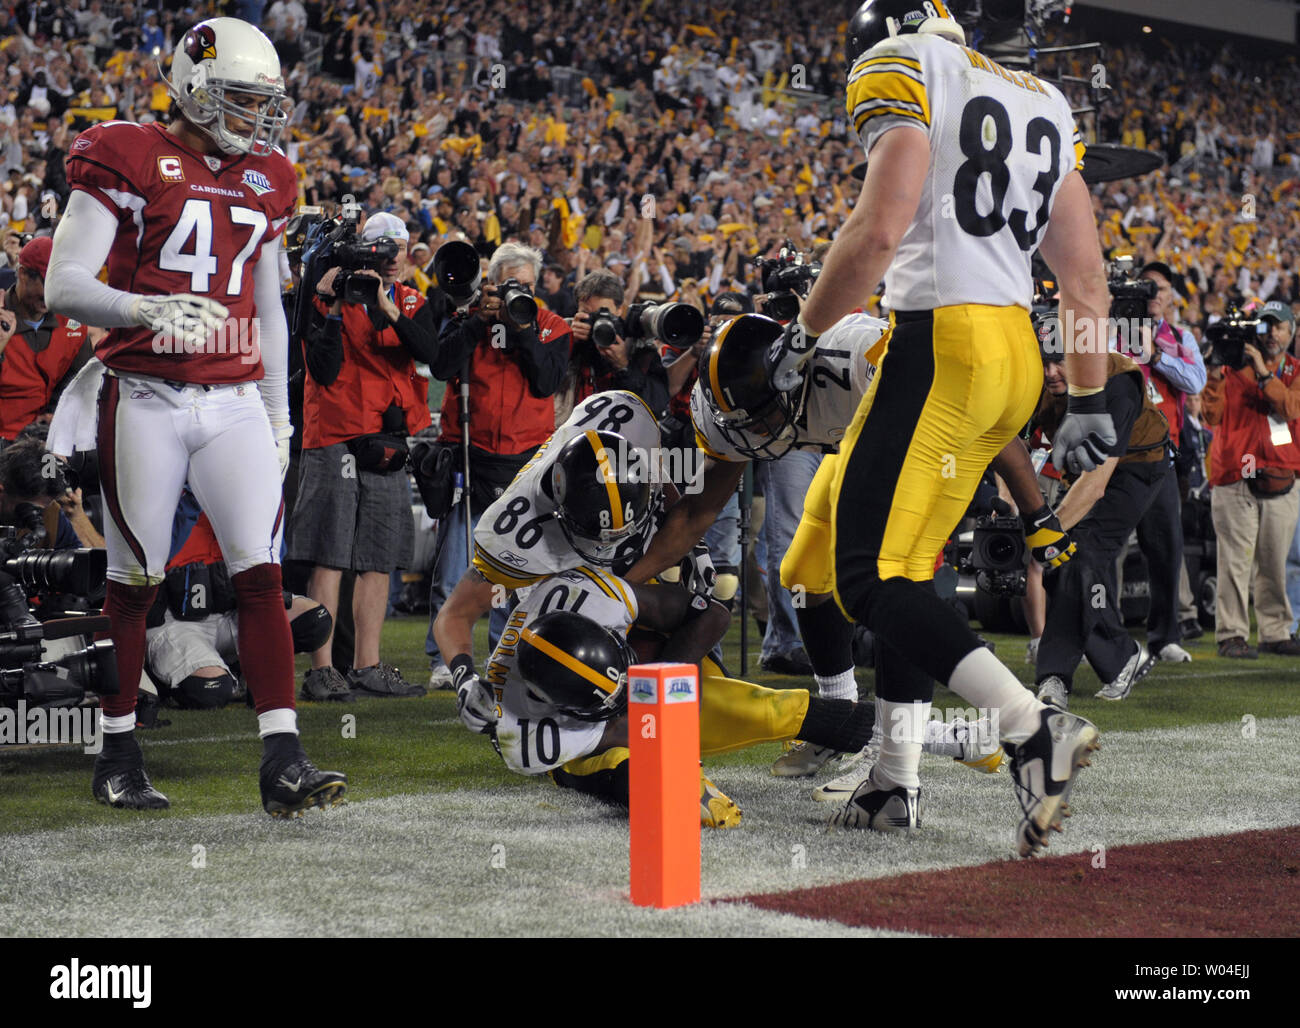 Pittsburgh Steelers Hines Ward (C), Mewelde Moore (2nd R), and Heath Miller celebrate with wide receiver Santonio Holmes after he pulled in the game-winning touchdown reception, as Arizona Cardinals safety Aaron Francisco looks on, in the fourth quarter at Super Bowl XLIII at Raymond James Stadium in Tampa, Florida, on February 1, 2009. The Steelers defeated the Cardinals 27-23.   (UPI Photo/Kevin Dietsch) Stock Photo